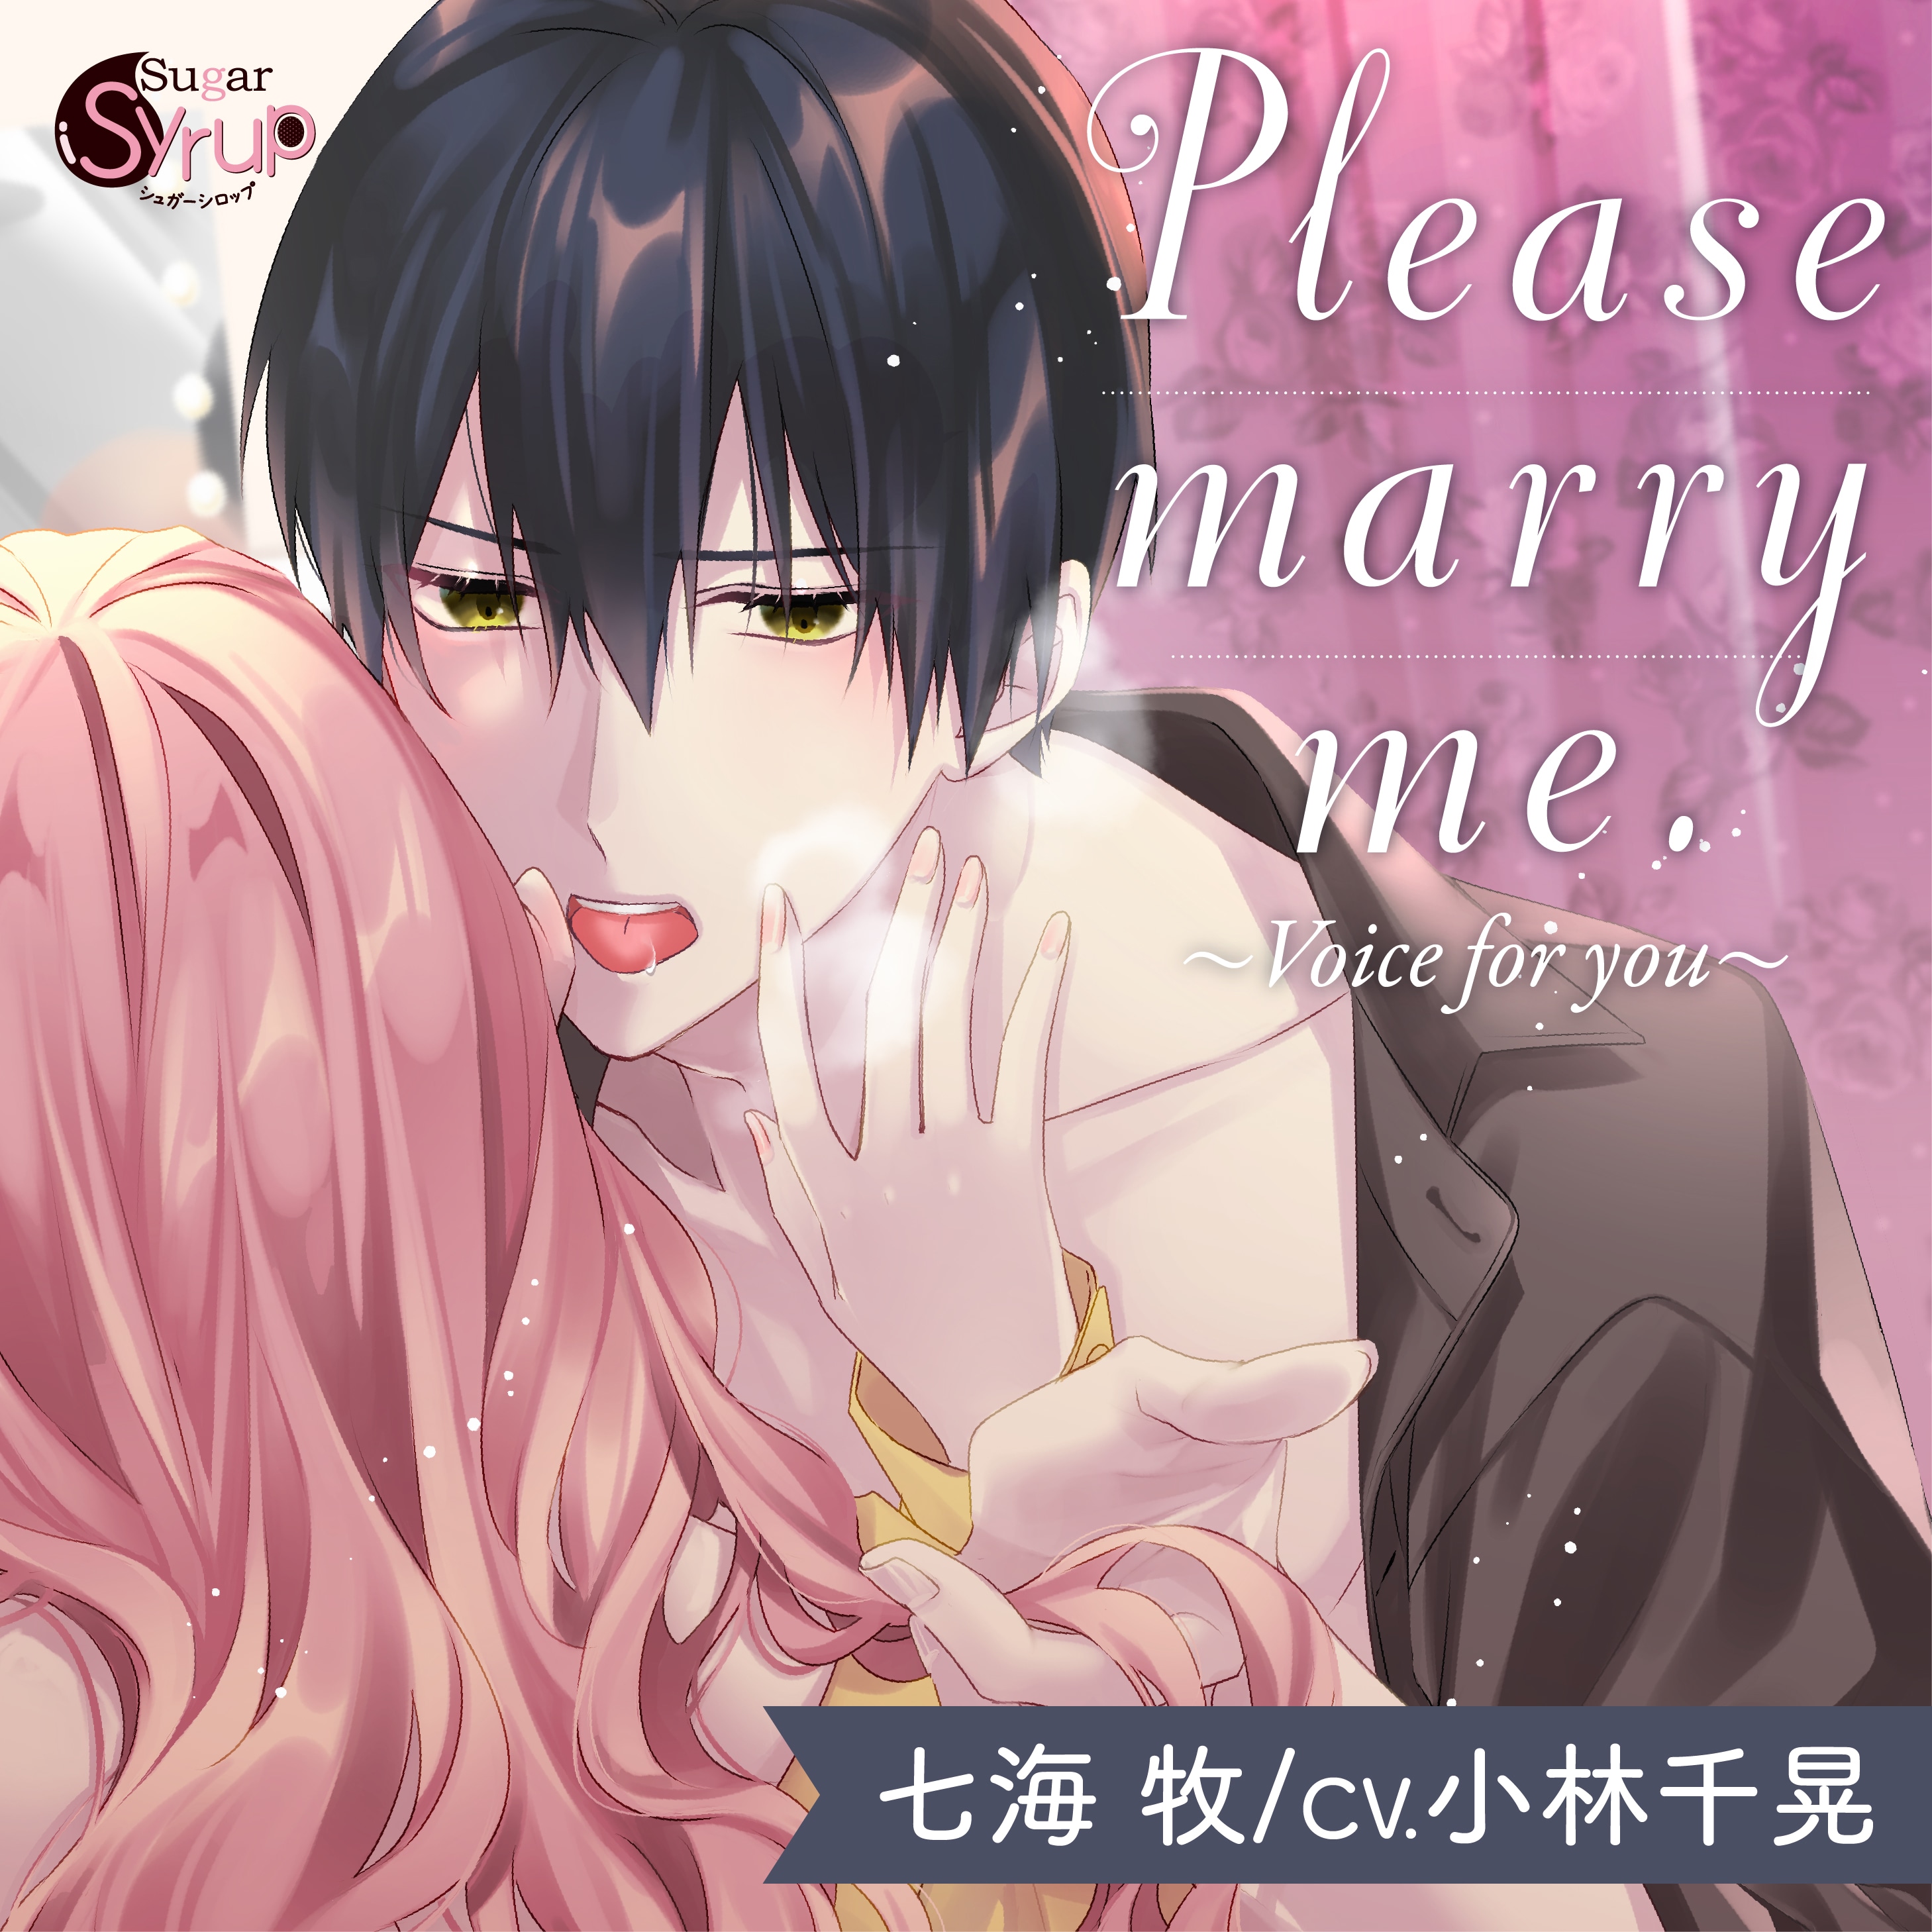 Please marry me.～Voice for you～（出演声優：小林千晃 青樹鮎希）が「ポケットドラマCD」にて独占先行配信開始！